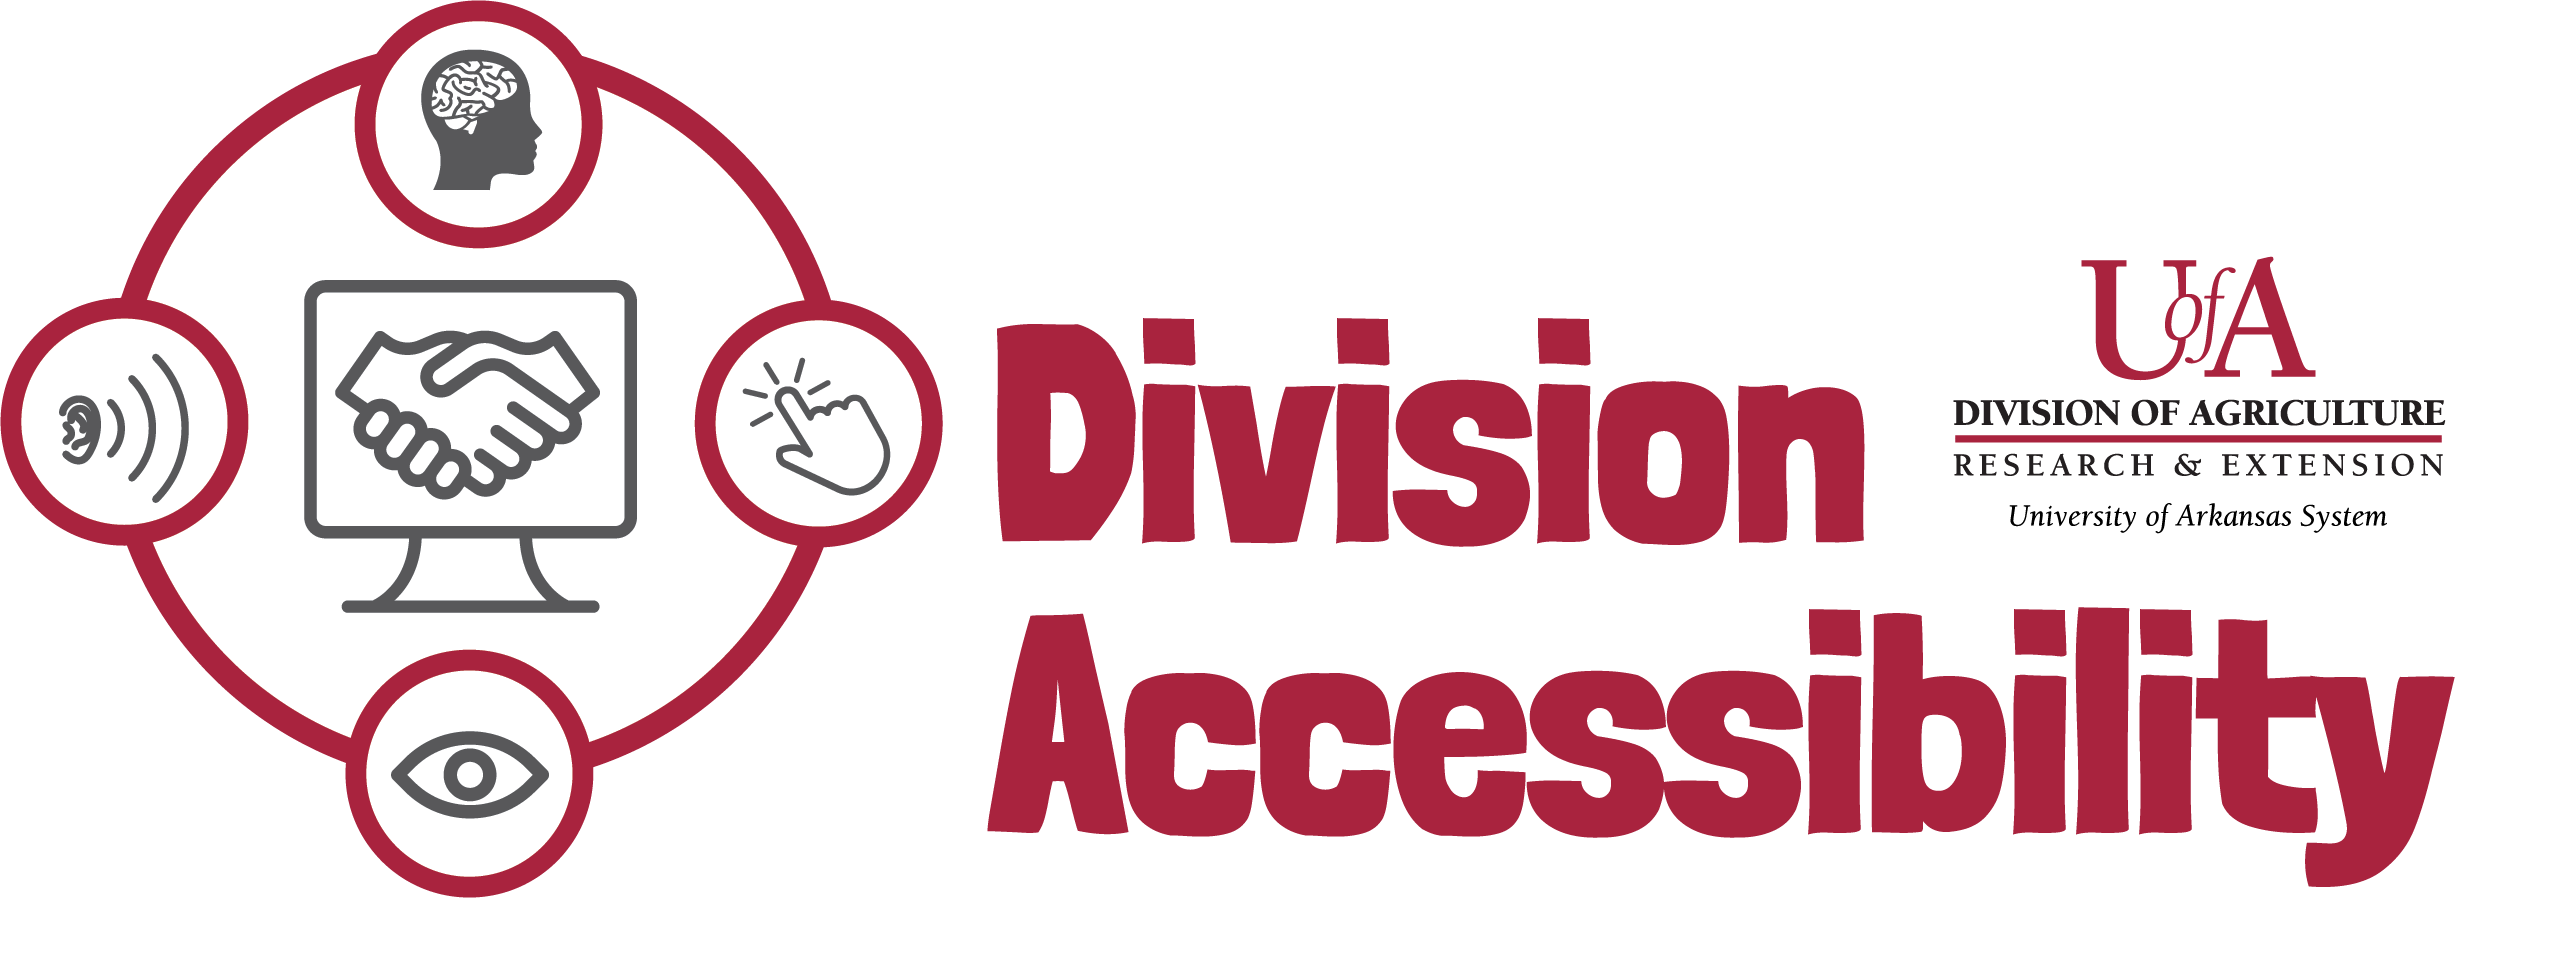 U of A University of Arkansas Division of Agriculture Research and Extension Division Accessibility Logo